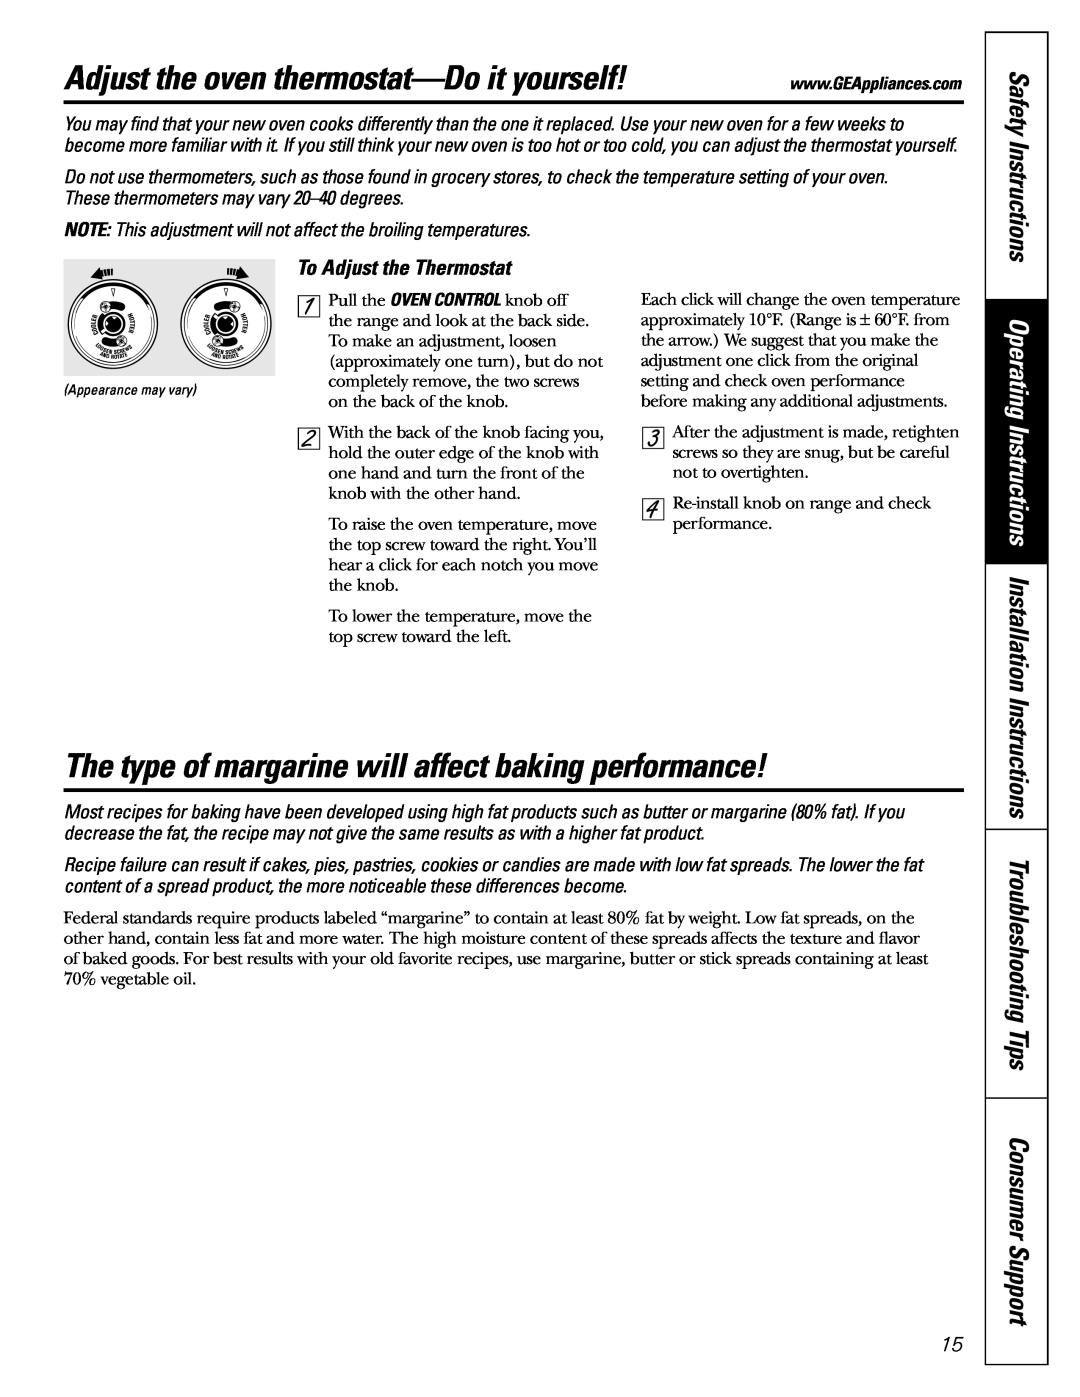 GE JGBC20 installation instructions Adjust the oven thermostat-Doit yourself, Safety Instructions, To Adjust the Thermostat 